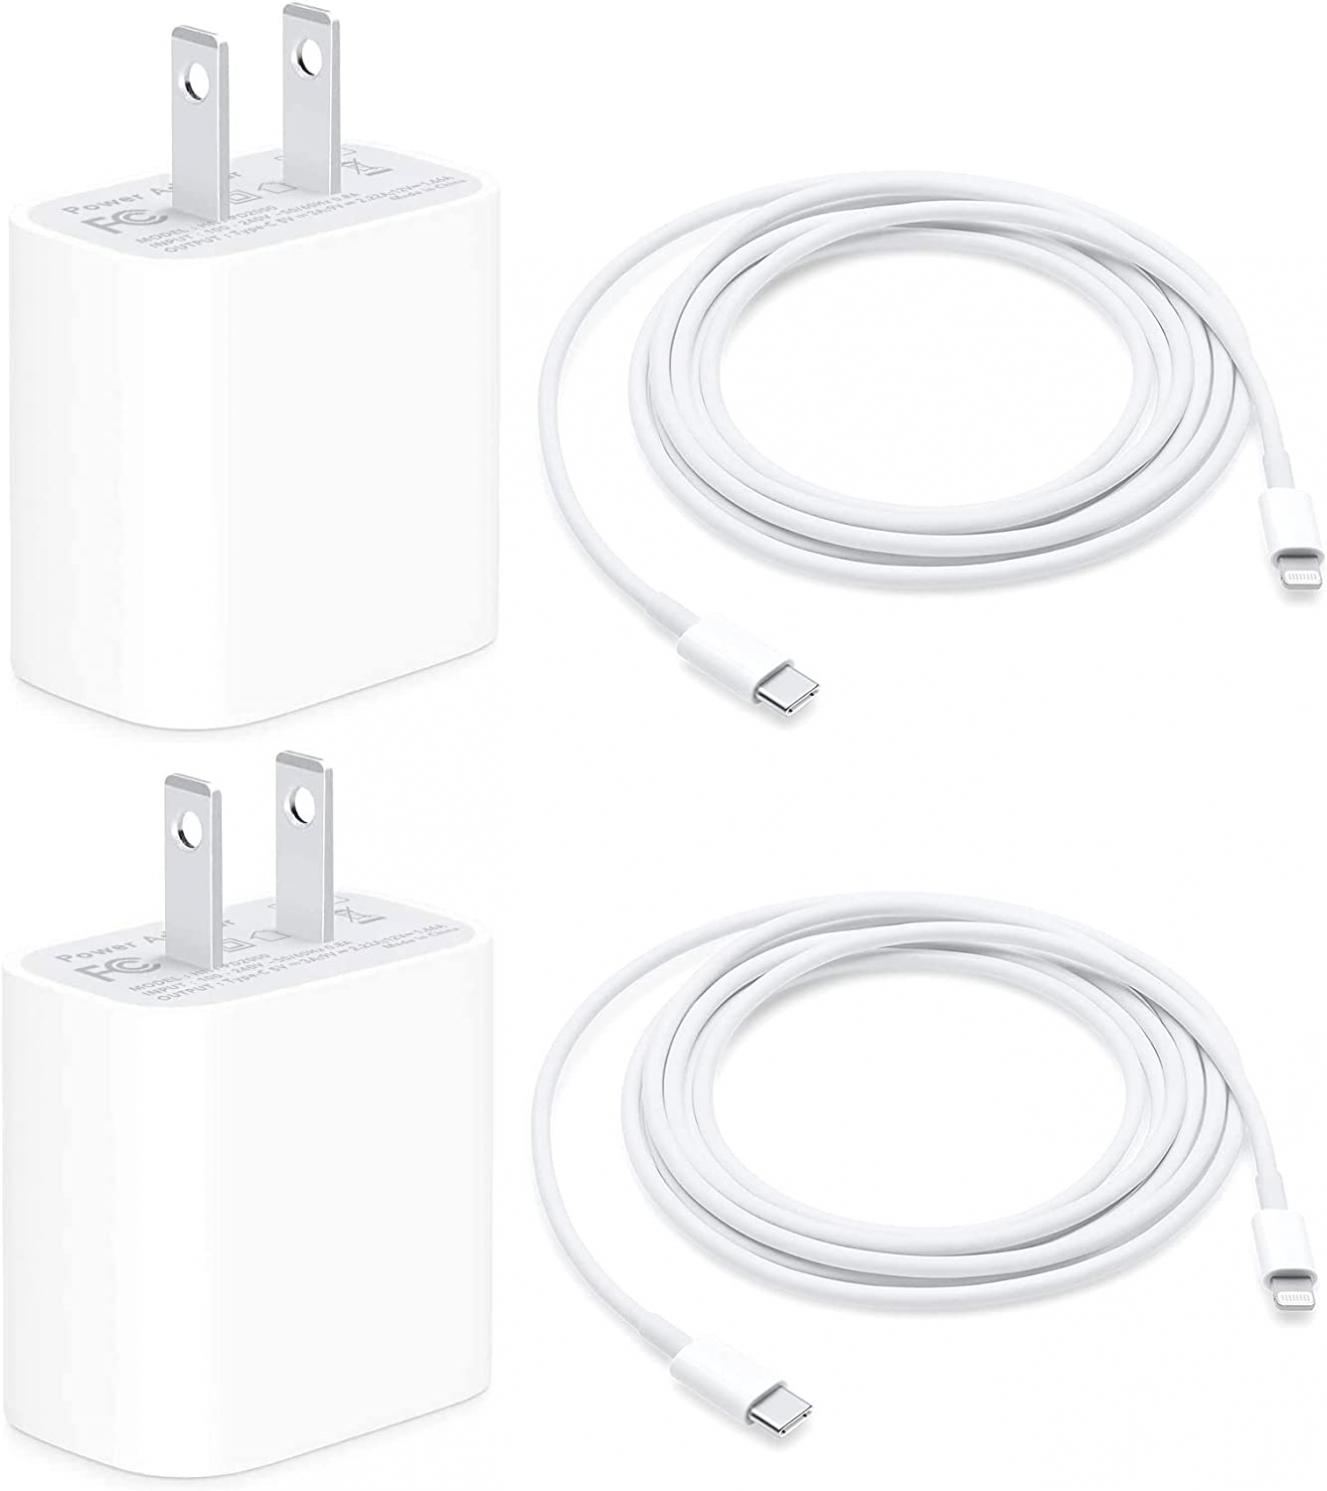 iPhone 14 13 12 11 Fast Charger [Apple MFi Certified] High Speed iPhone Charger 2-Pack 20W PD USB C 6.6FT Wall Charger Compatible with iPhone 13/13Pro/12/12 Pro/11/11Pro/XS/Max/XR/X/8/8 Plus,iPad